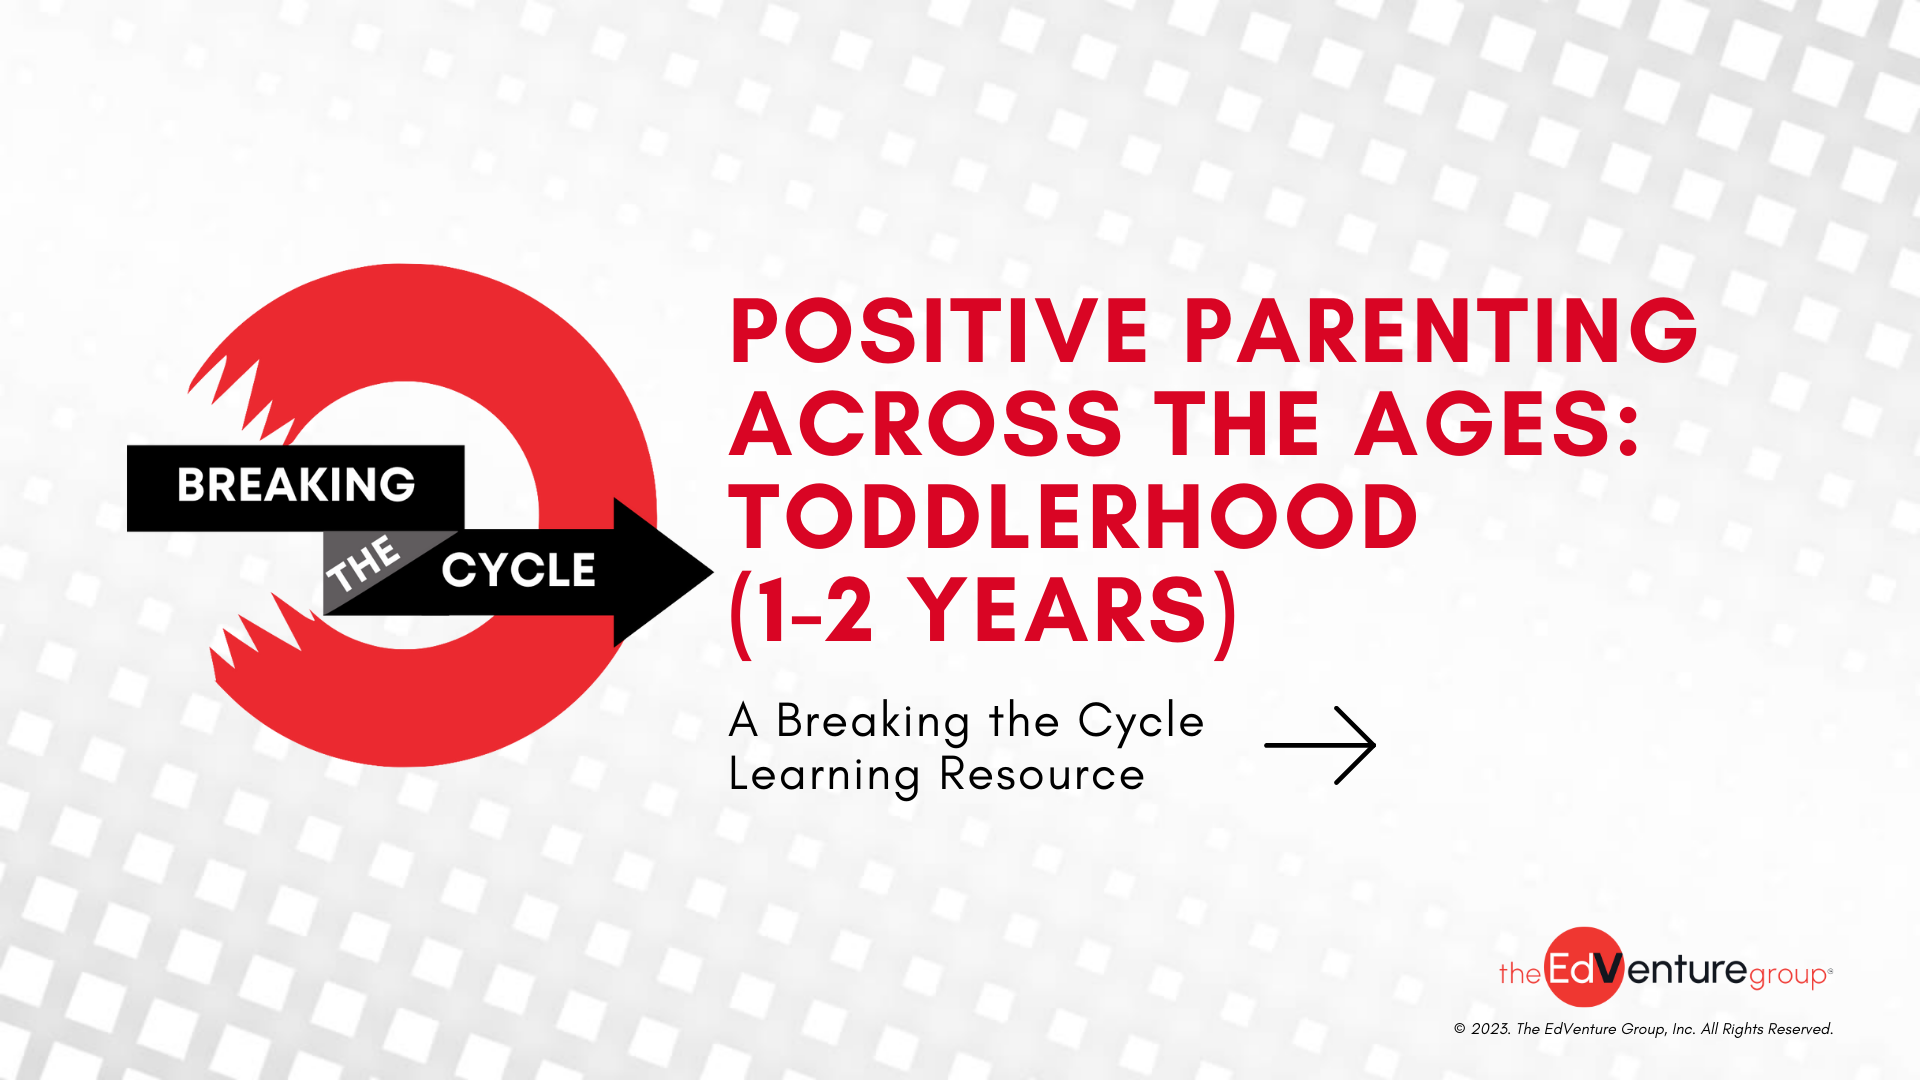 Toddlerhood (1-2 years) Positive Parenting Across the Ages